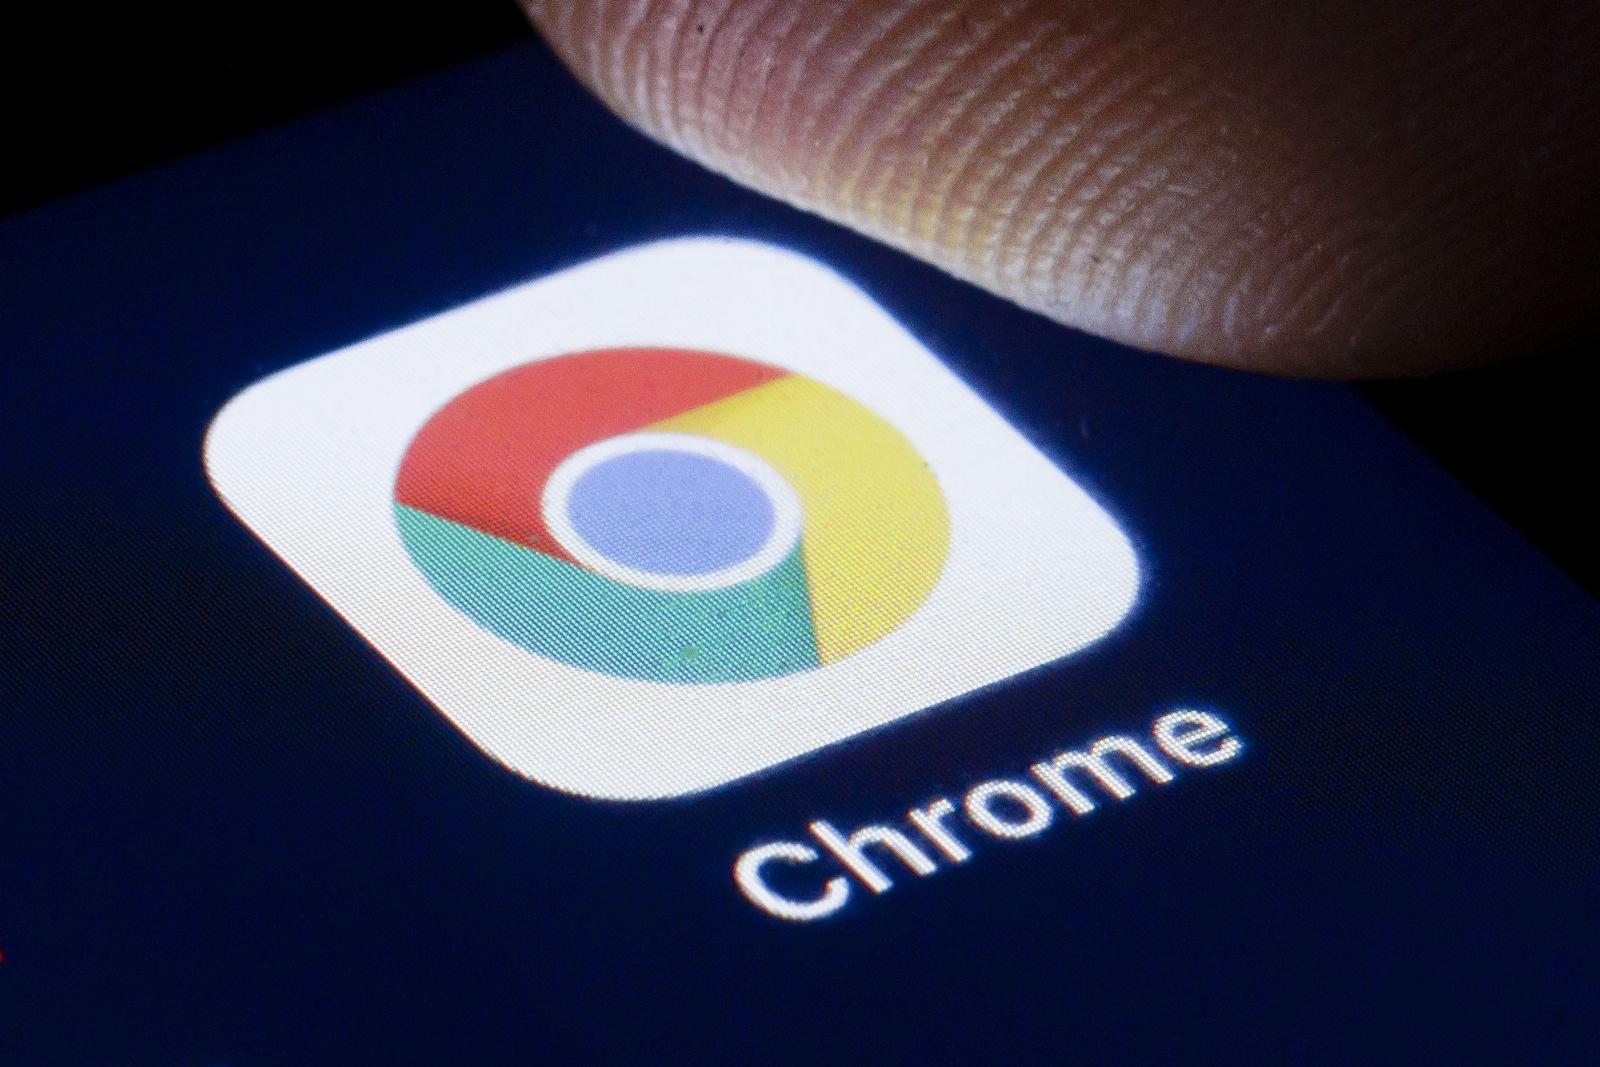 Chrome makes it easier to customize the appearance of your browser